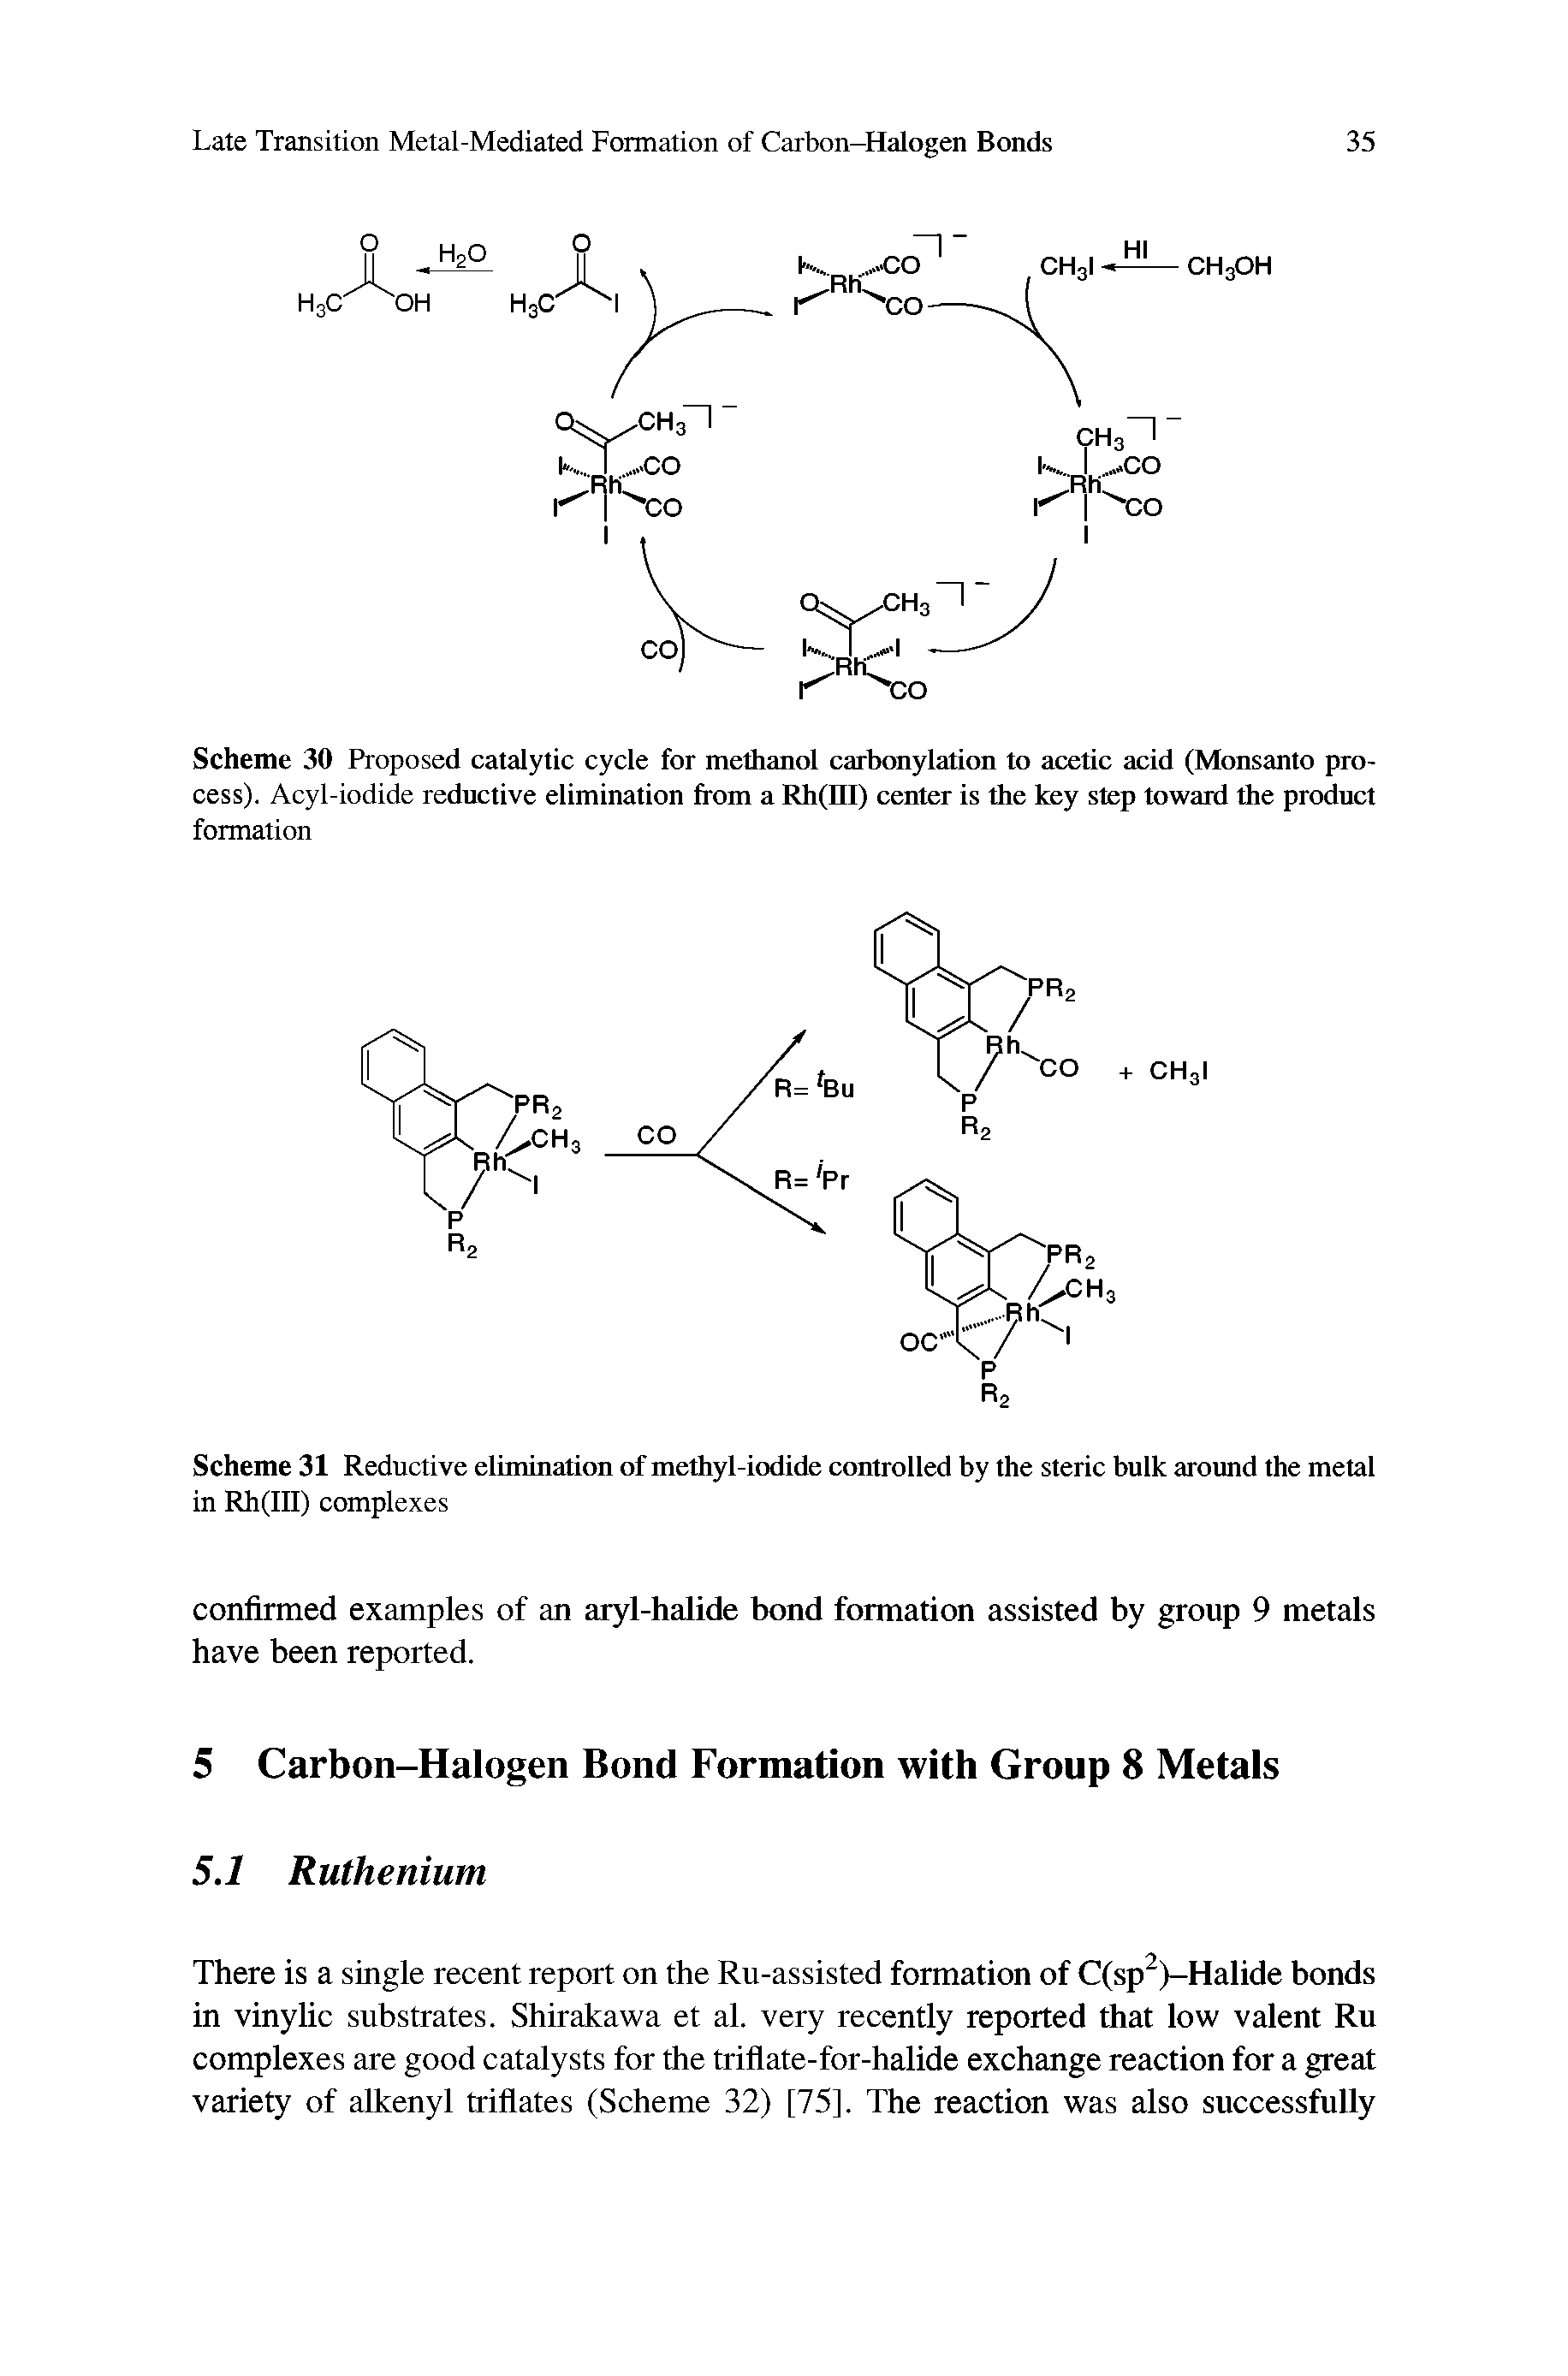 Scheme 30 Proposed catalytic cycle for methanol carbonylation to acetic acid (Monsanto process). Acyl-iodide reductive elimination from a Rh(ni) center is the key step toward the product formation...